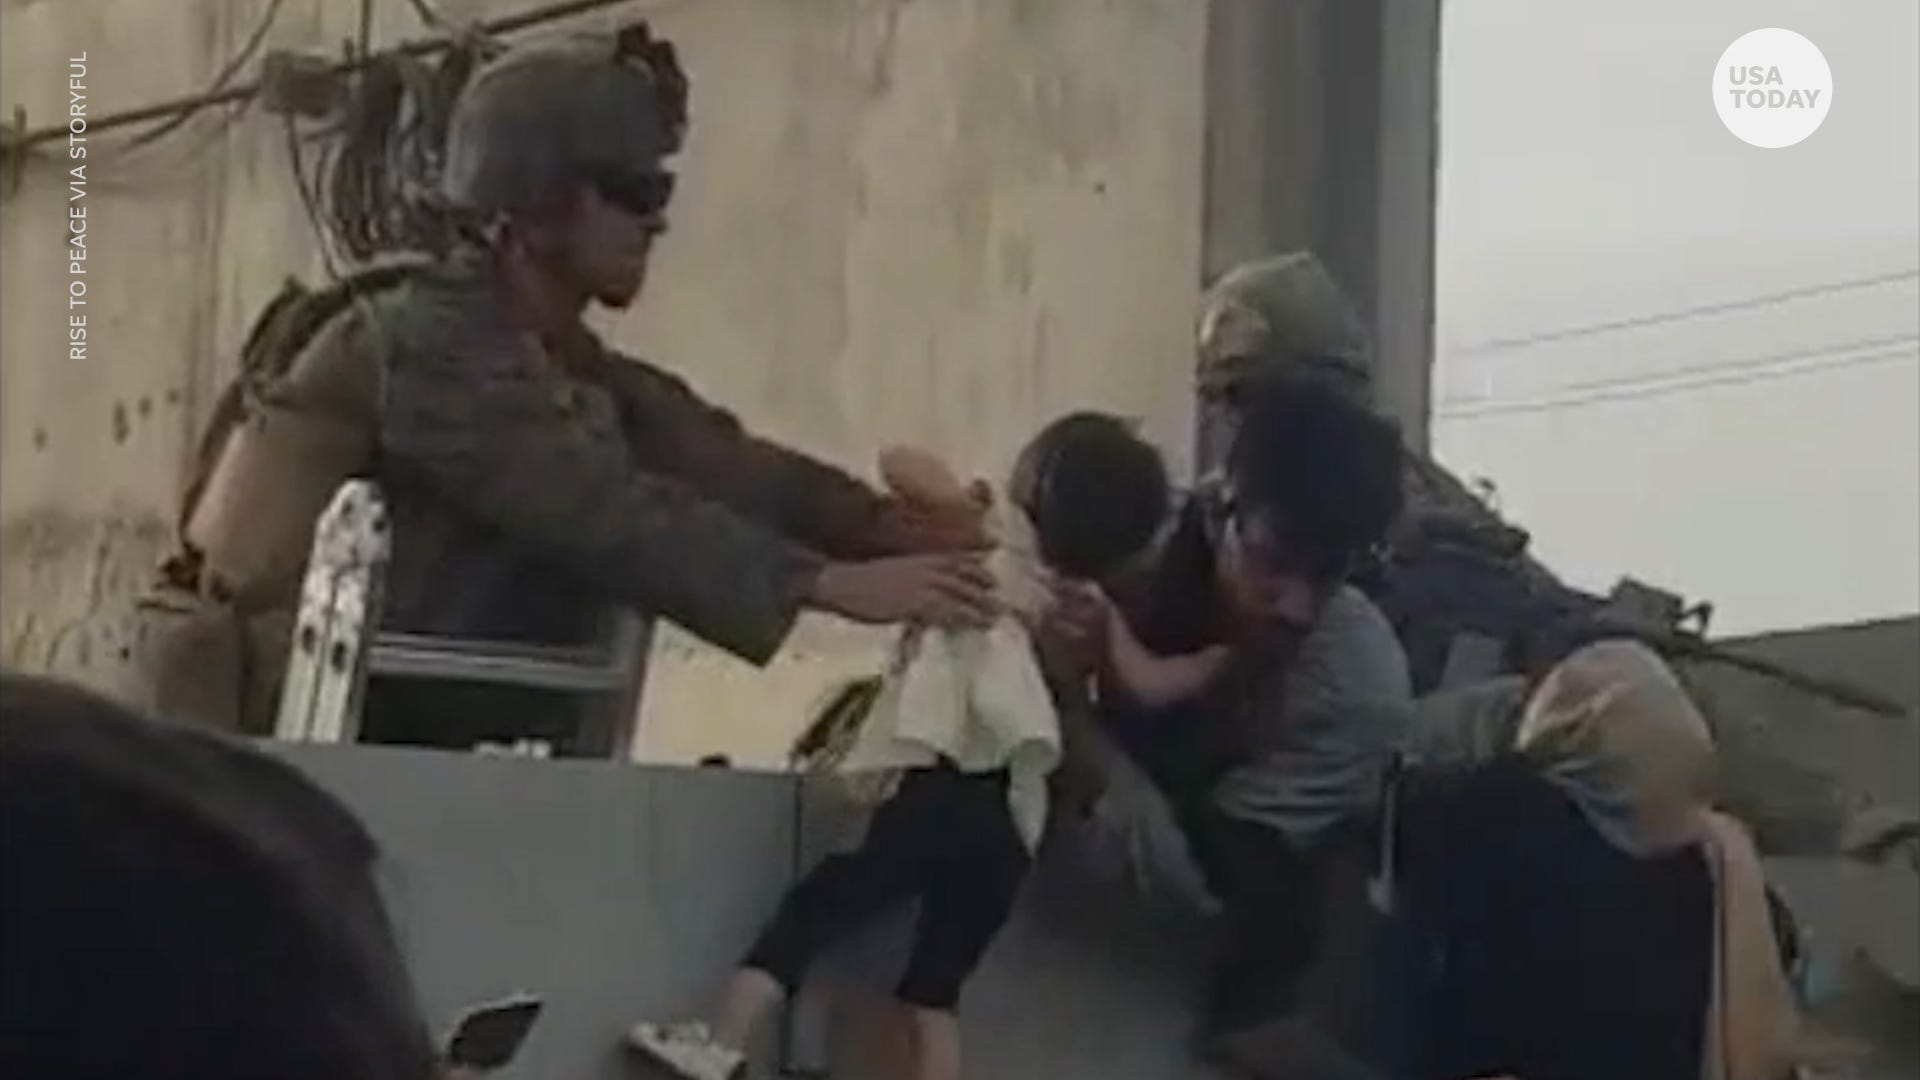 Child sleeps under US soldier's uniform, another passed over a wall: These are the kids fleeing Afghanistan thumbnail